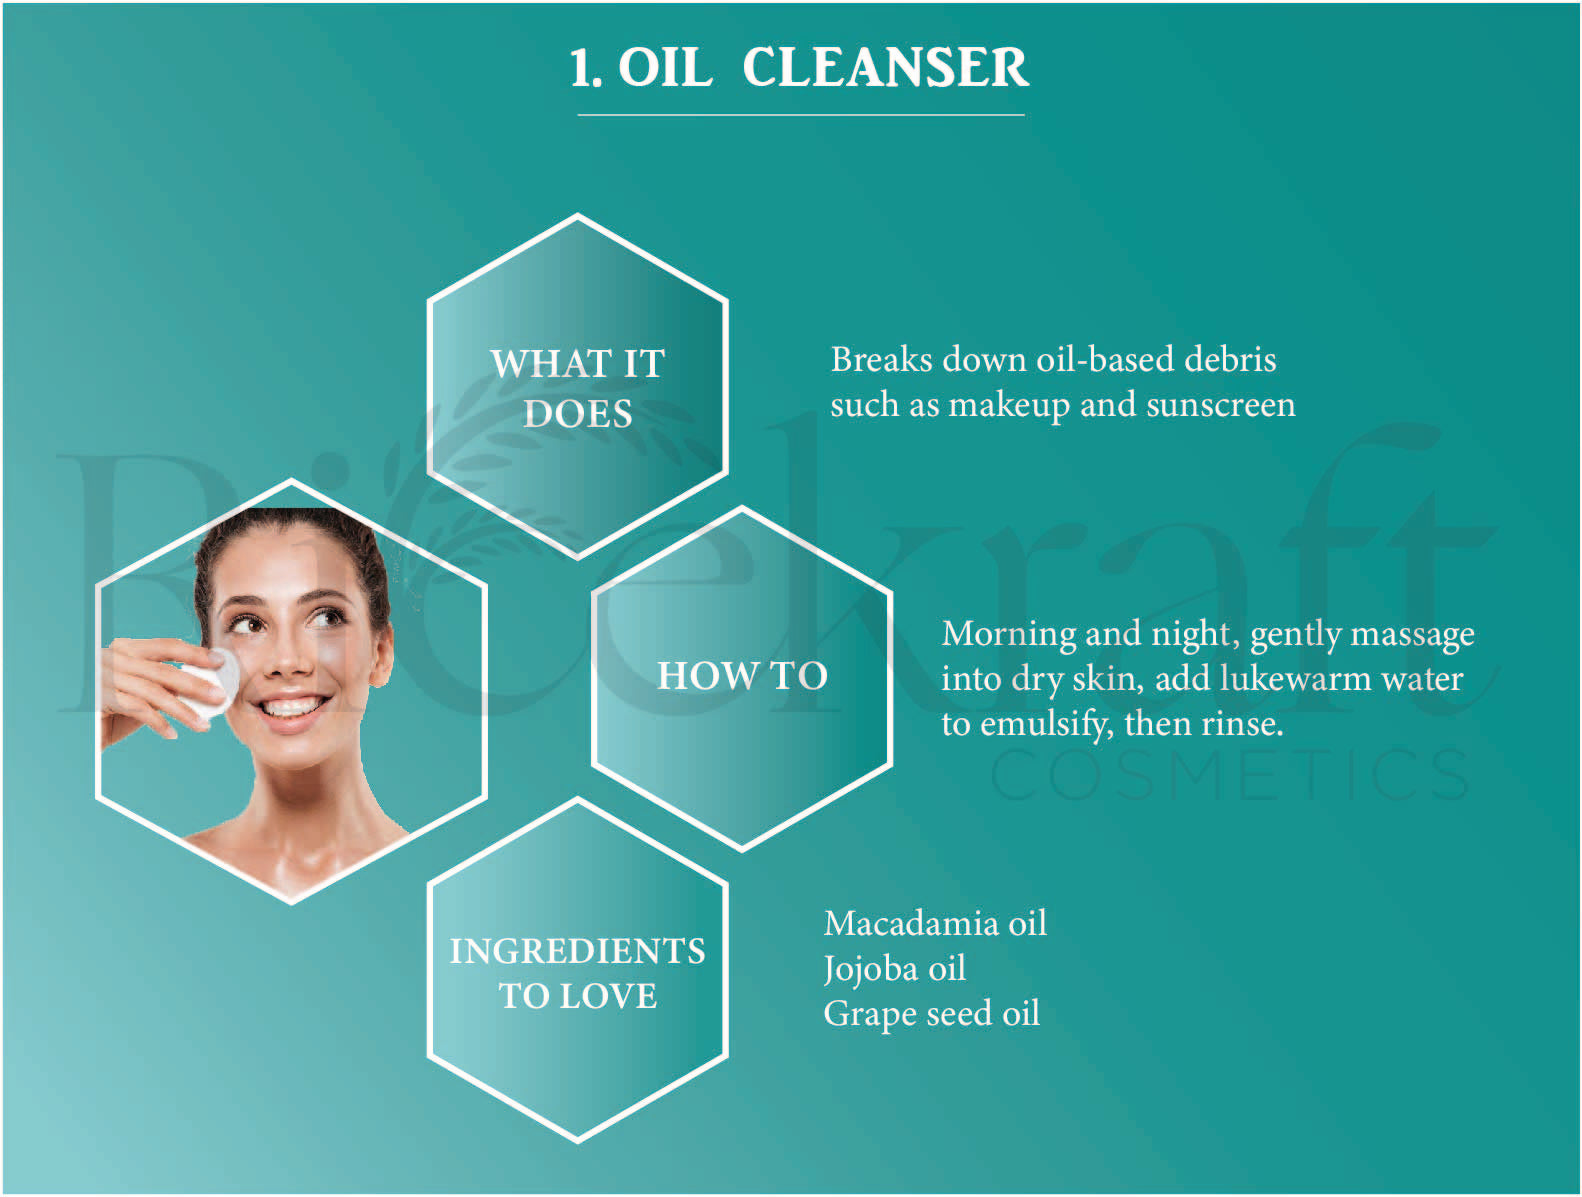 Oil Cleanser - Breaks down makeup and sunscreen. Use morning and night, massage into dry skin, emulsify with lukewarm water, and rinse. Ingredients: Macadamia, Jojoba, Grape seed oil."